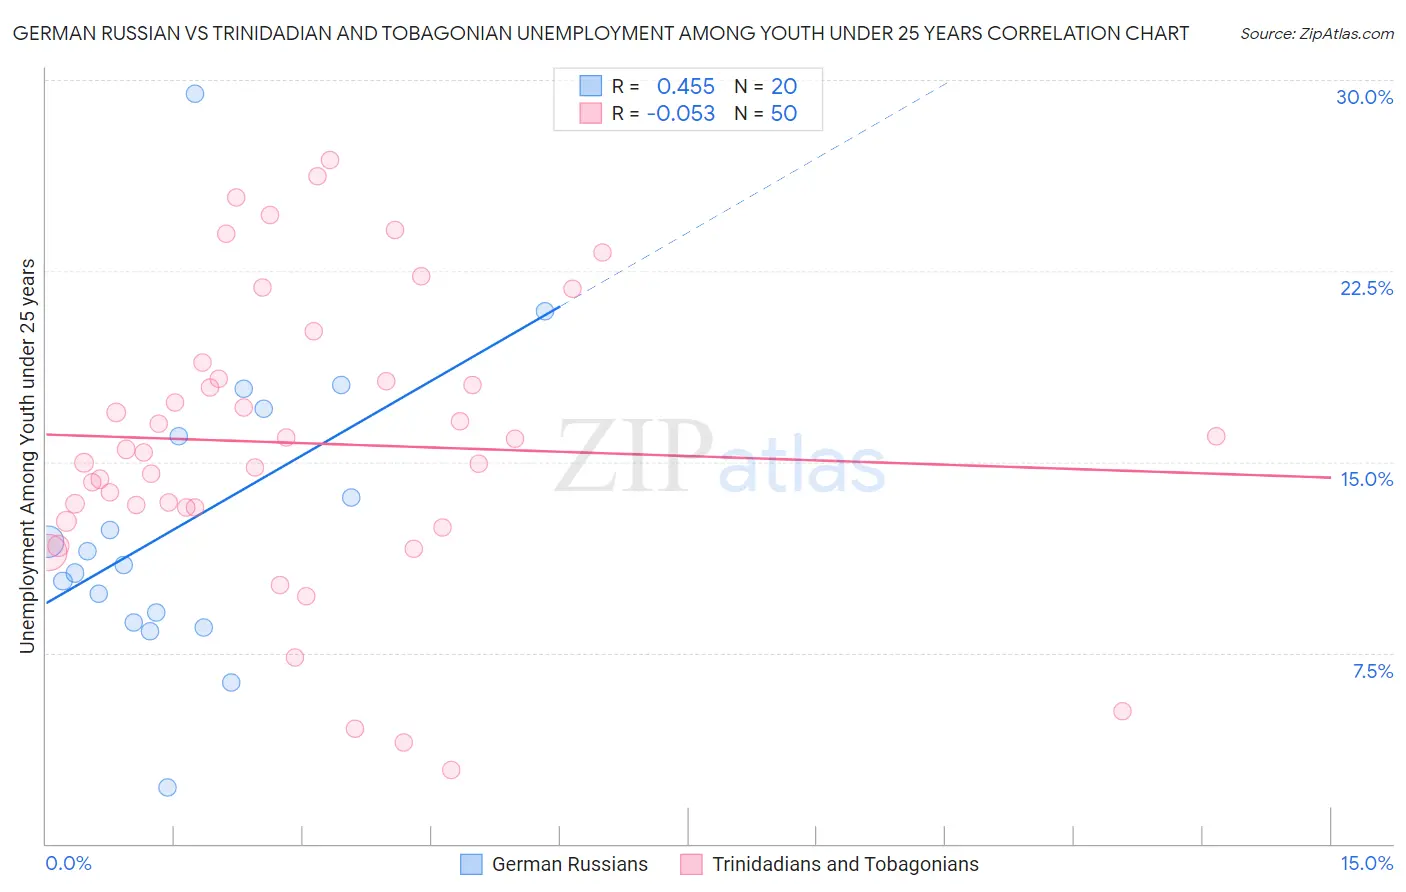 German Russian vs Trinidadian and Tobagonian Unemployment Among Youth under 25 years